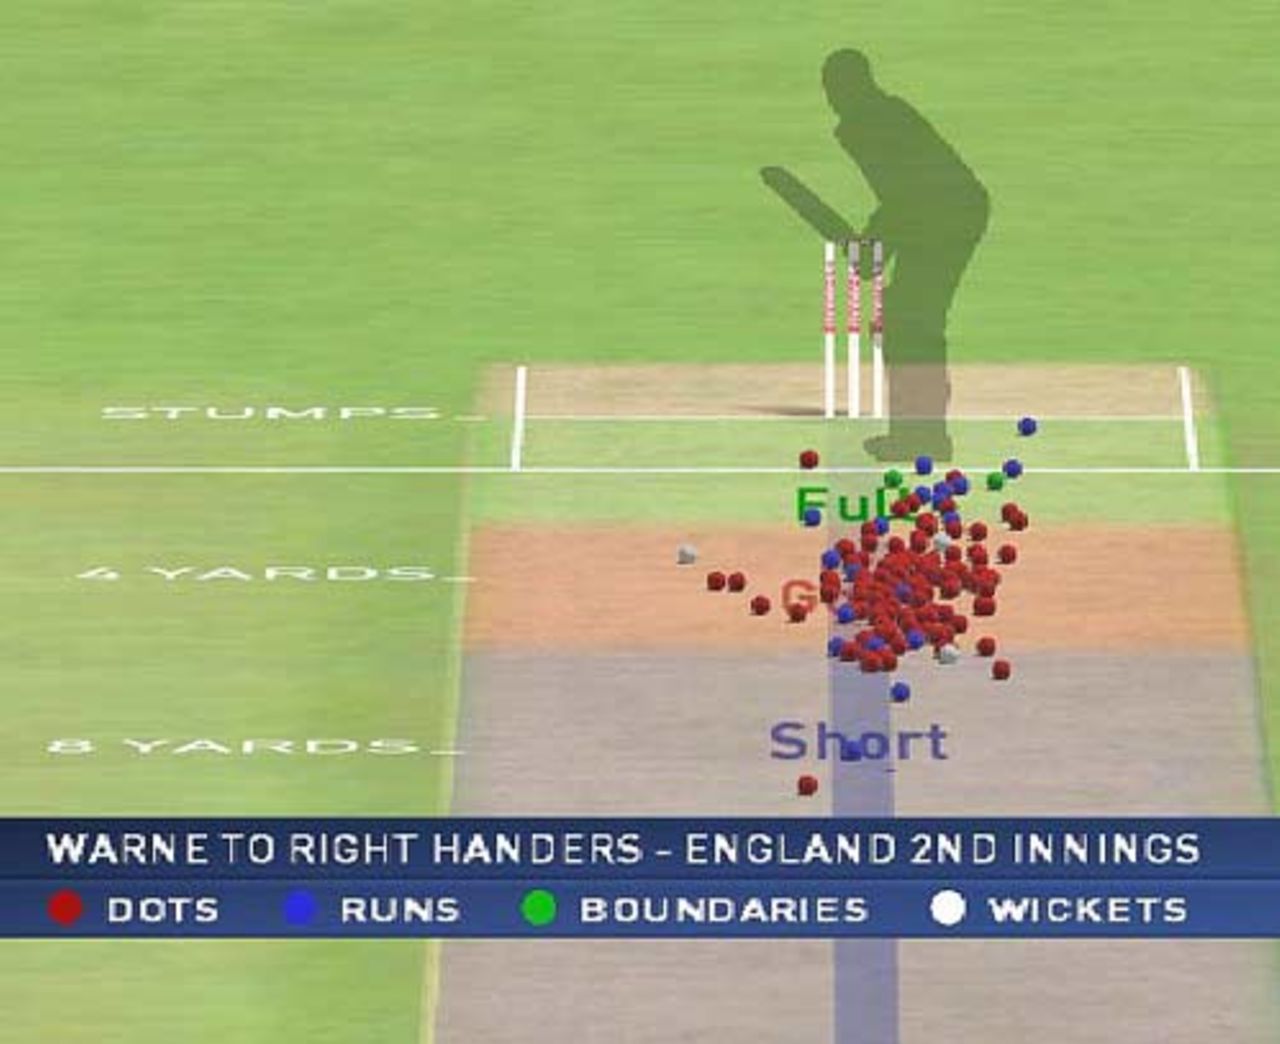 Where Shane Warne pitched it to right-handers in the England second innings, Australia v England, 2nd Test, Adelaide